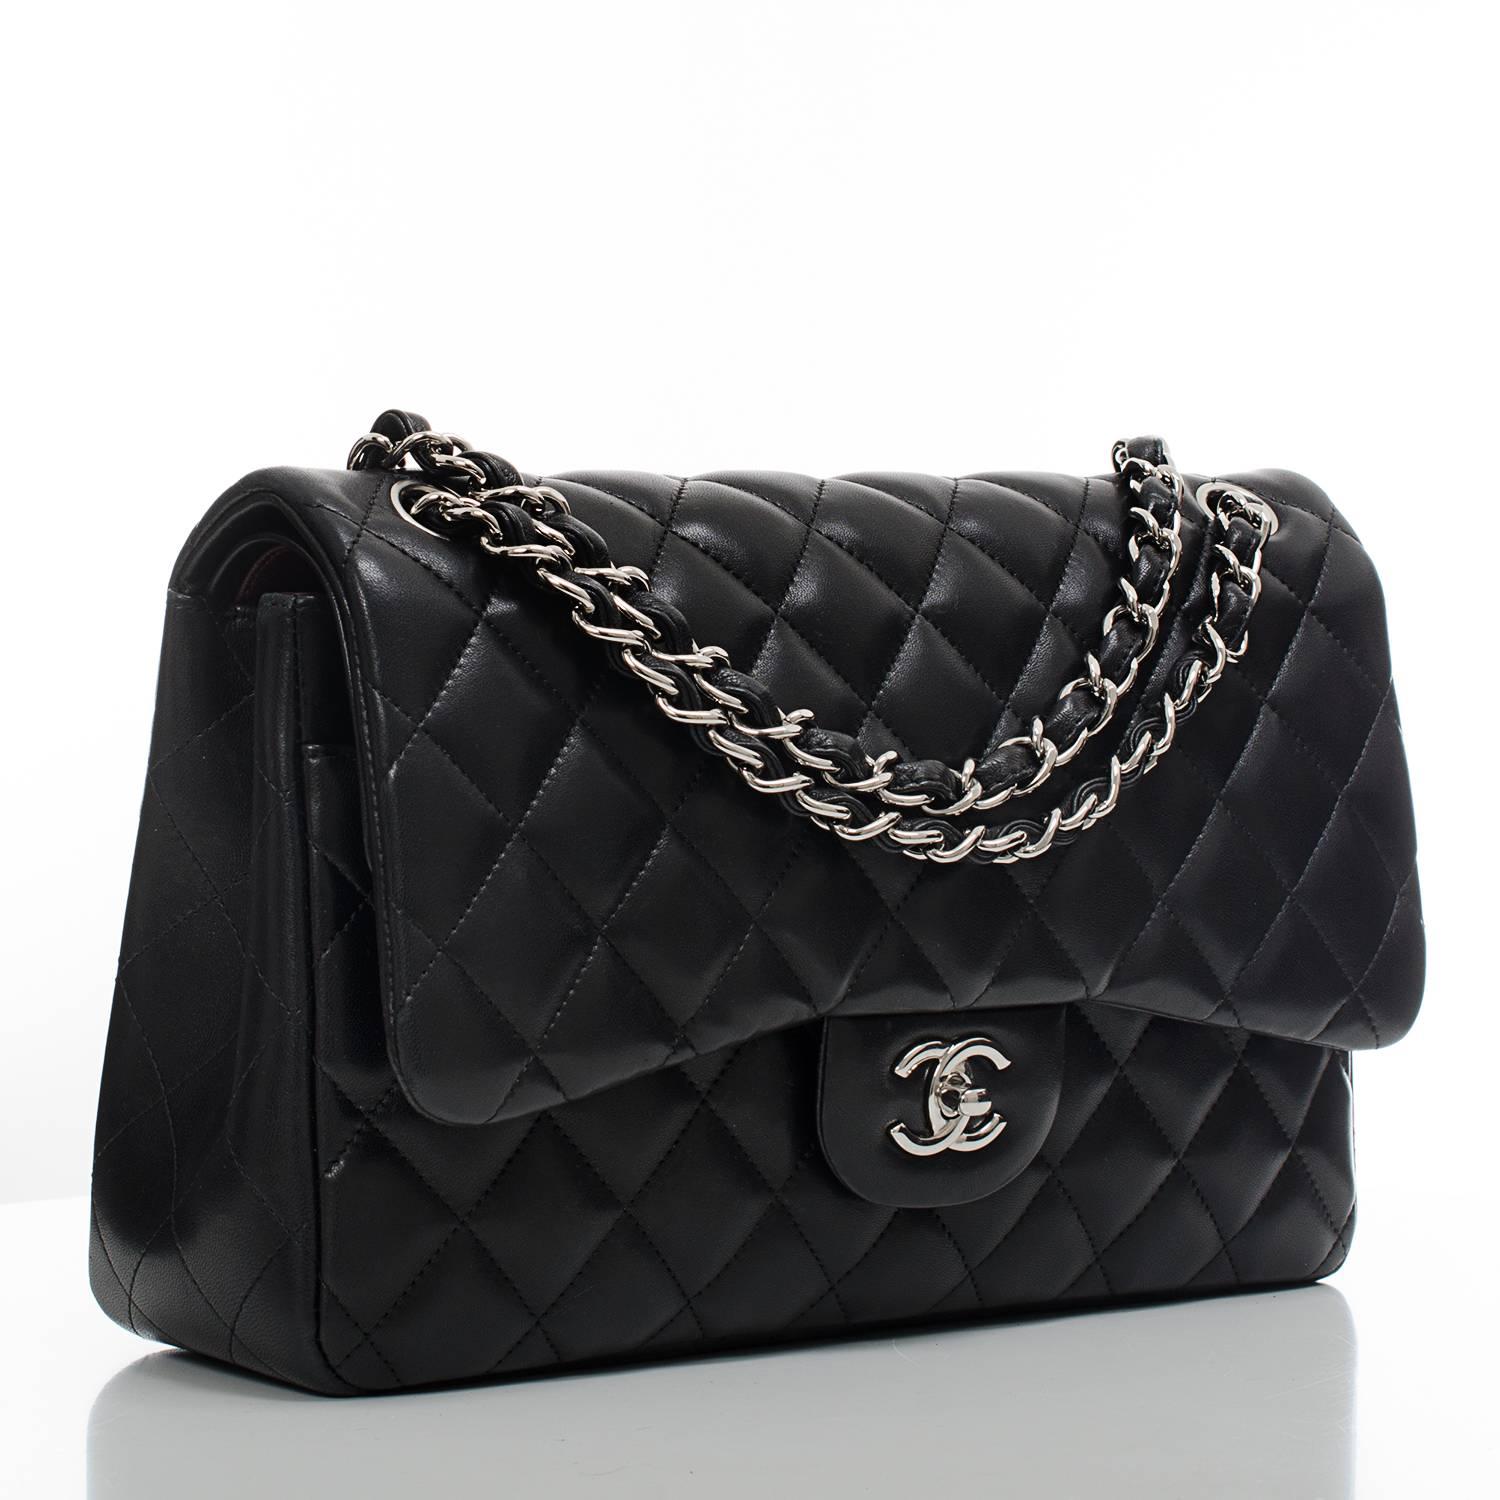 Chanel Jumbo Classic double flap of black lambskin with silver tone hardware featuring front flap with signature CC turnlock closure, half moon back pocket, and adjustable interwoven silver tone chain link and black leather shoulder strap.

The